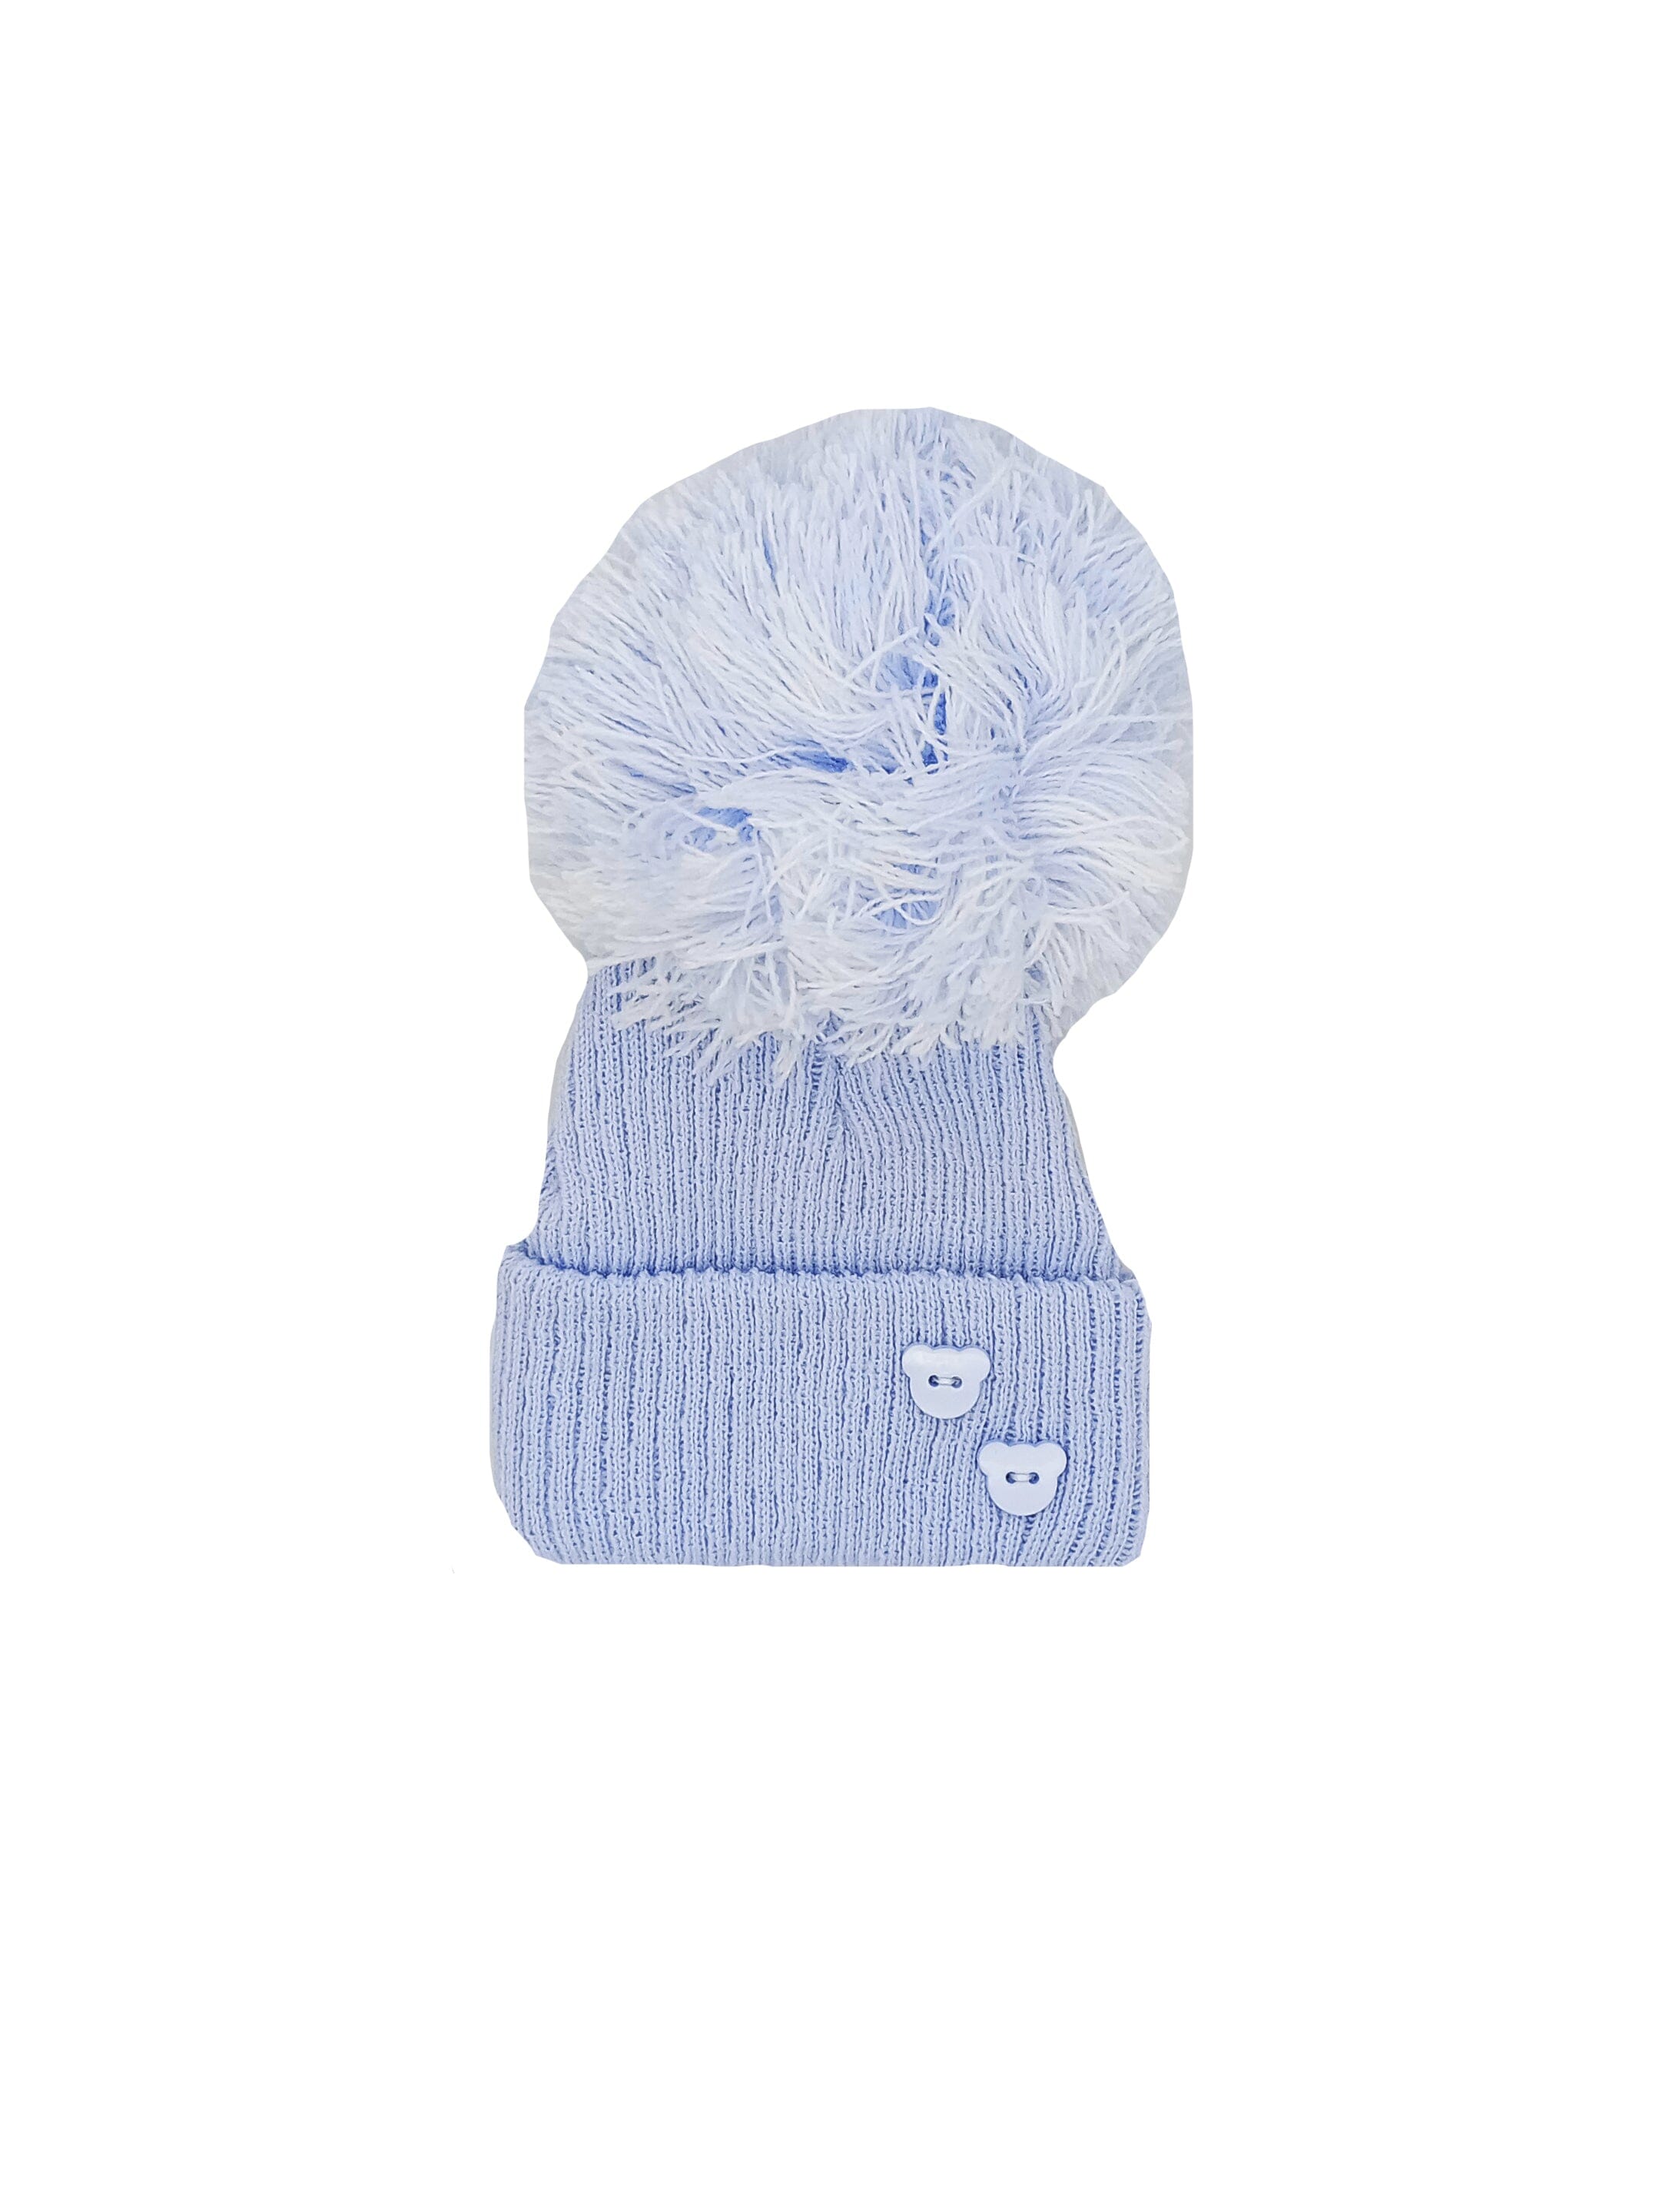 Blue Knitted Pom Pom Hat Hat Little Mouse Baby Clothing and Gifts Ltd 